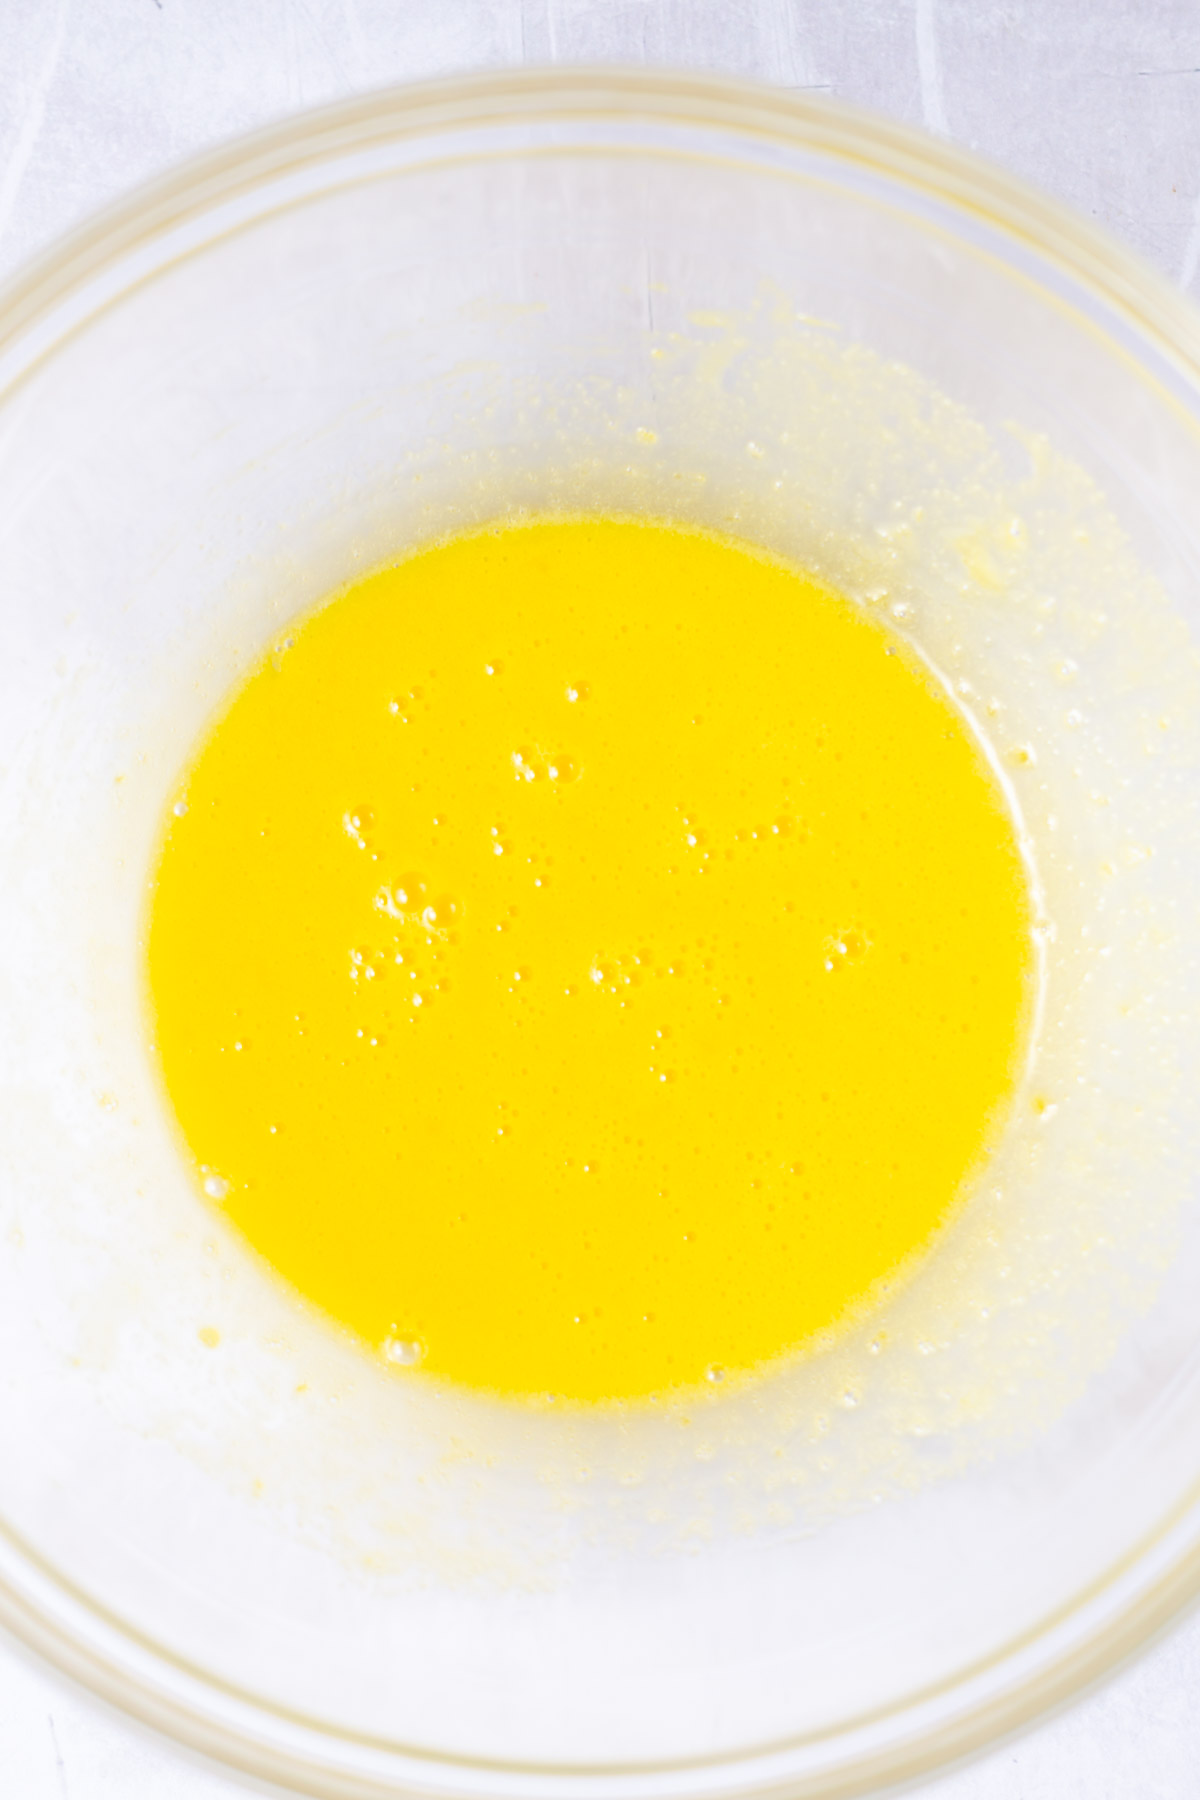 egg yolks and sugar whisked together before cooking